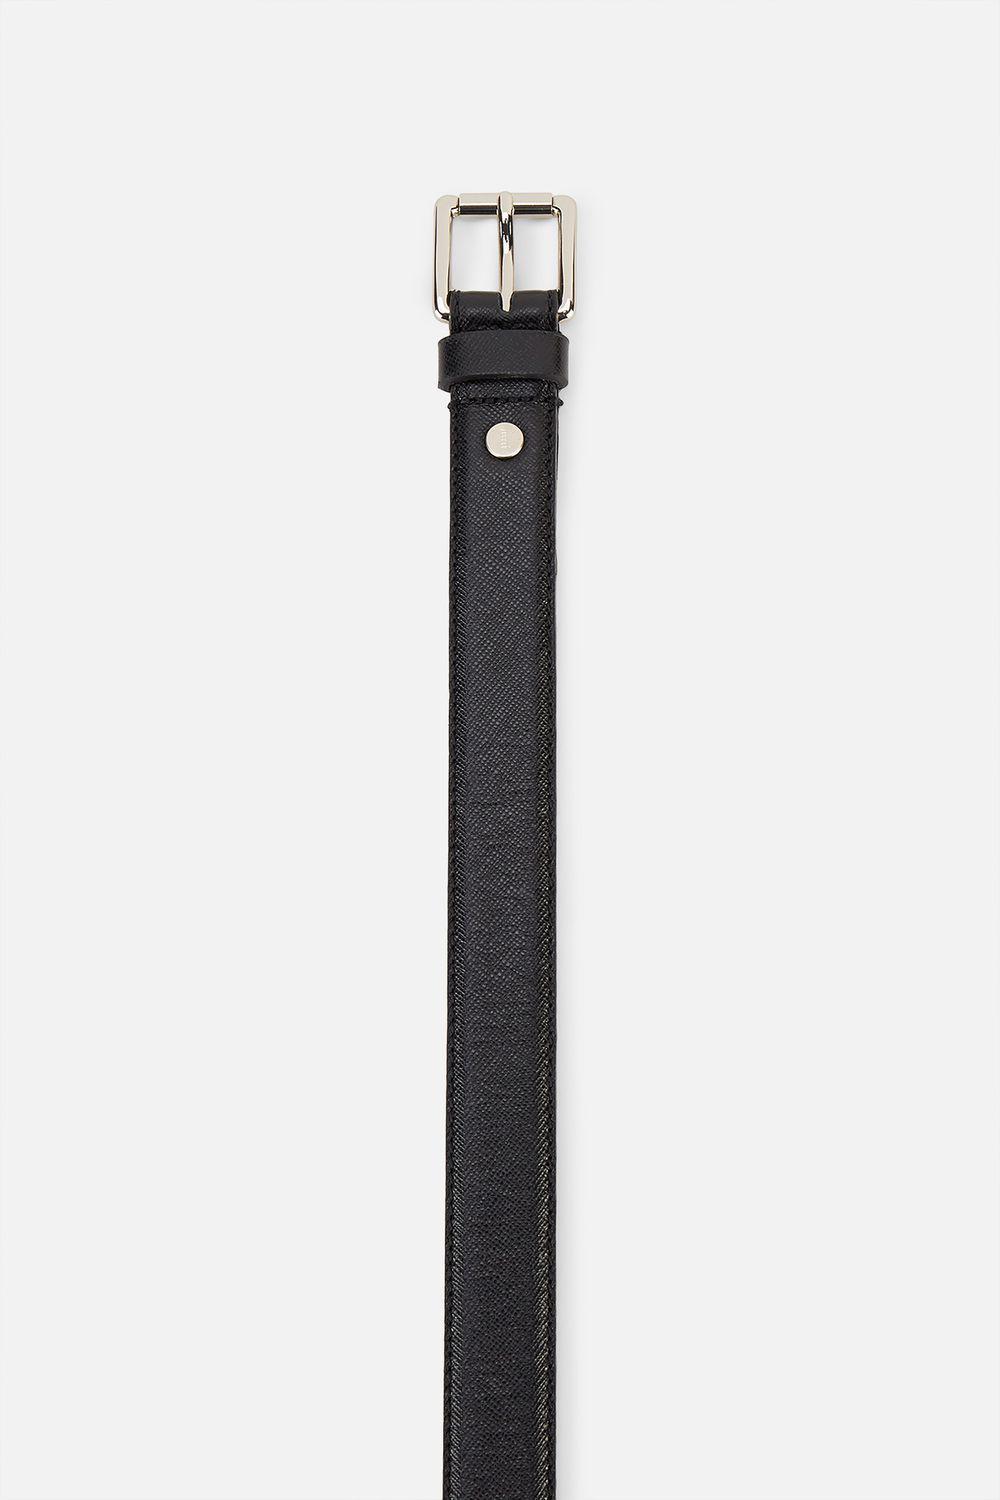 AMI Leather Thin Classic Belt in Black for Men - Lyst